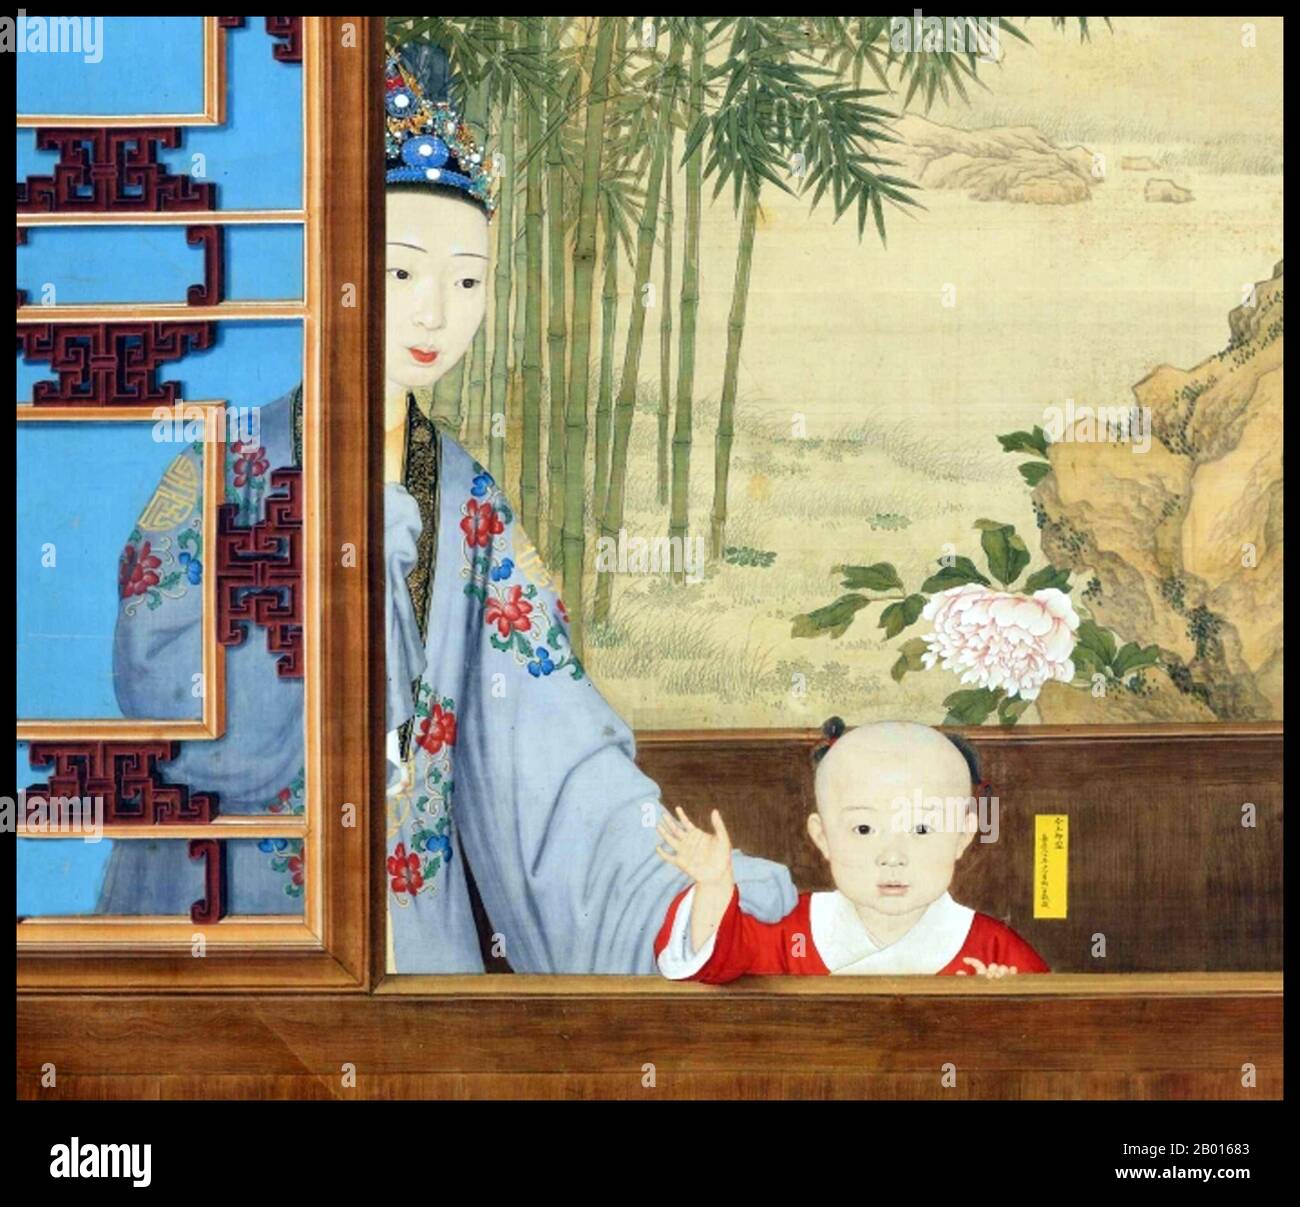 China: The future Jiaqing Emperor (13 November 1760 - 2 September 1820) with his mother, Empress Xiao Yi Chun (23 October 1727 - 28 February 1775). Handscroll painting by Giuseppe Castiglione (1688-1766), c. 1760s.  Empress Xiaoyichun came from the Han Chinese Wei clan, which was later renamed to the Manchu Weigiya clan. Lady Wei was elevated to 'Concubine Ling' in 1745, before becoming 'Consort Ling' in 1749. When Empress Nara died, the Qianlong Emperor did not name a successor, but Lady Wei became the highest ranking consort and was placed in charge of the imperial harem. Stock Photo